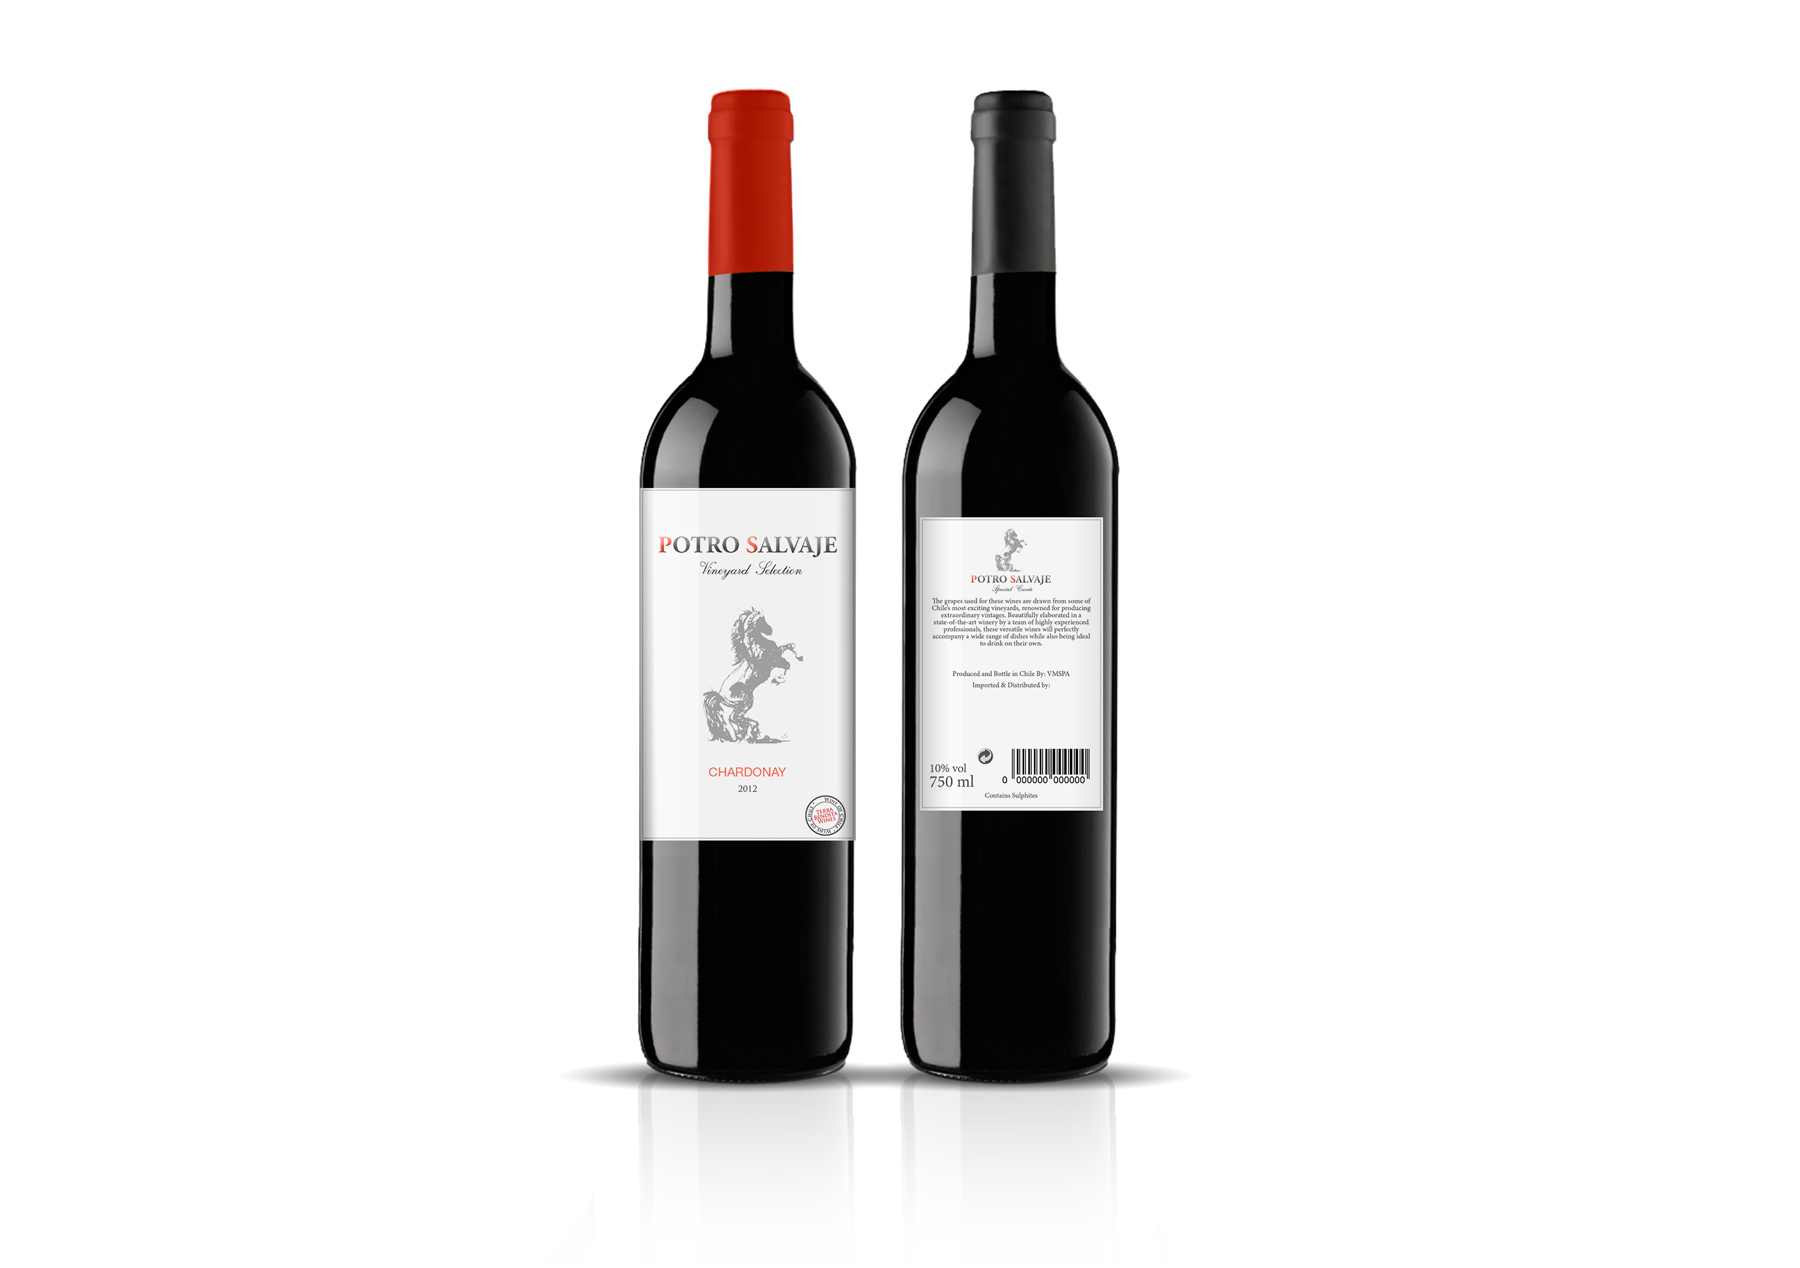 Portfolio of graphic and creative design works on wine labels and packaging for Chilean wine: POTRO SALVAJE